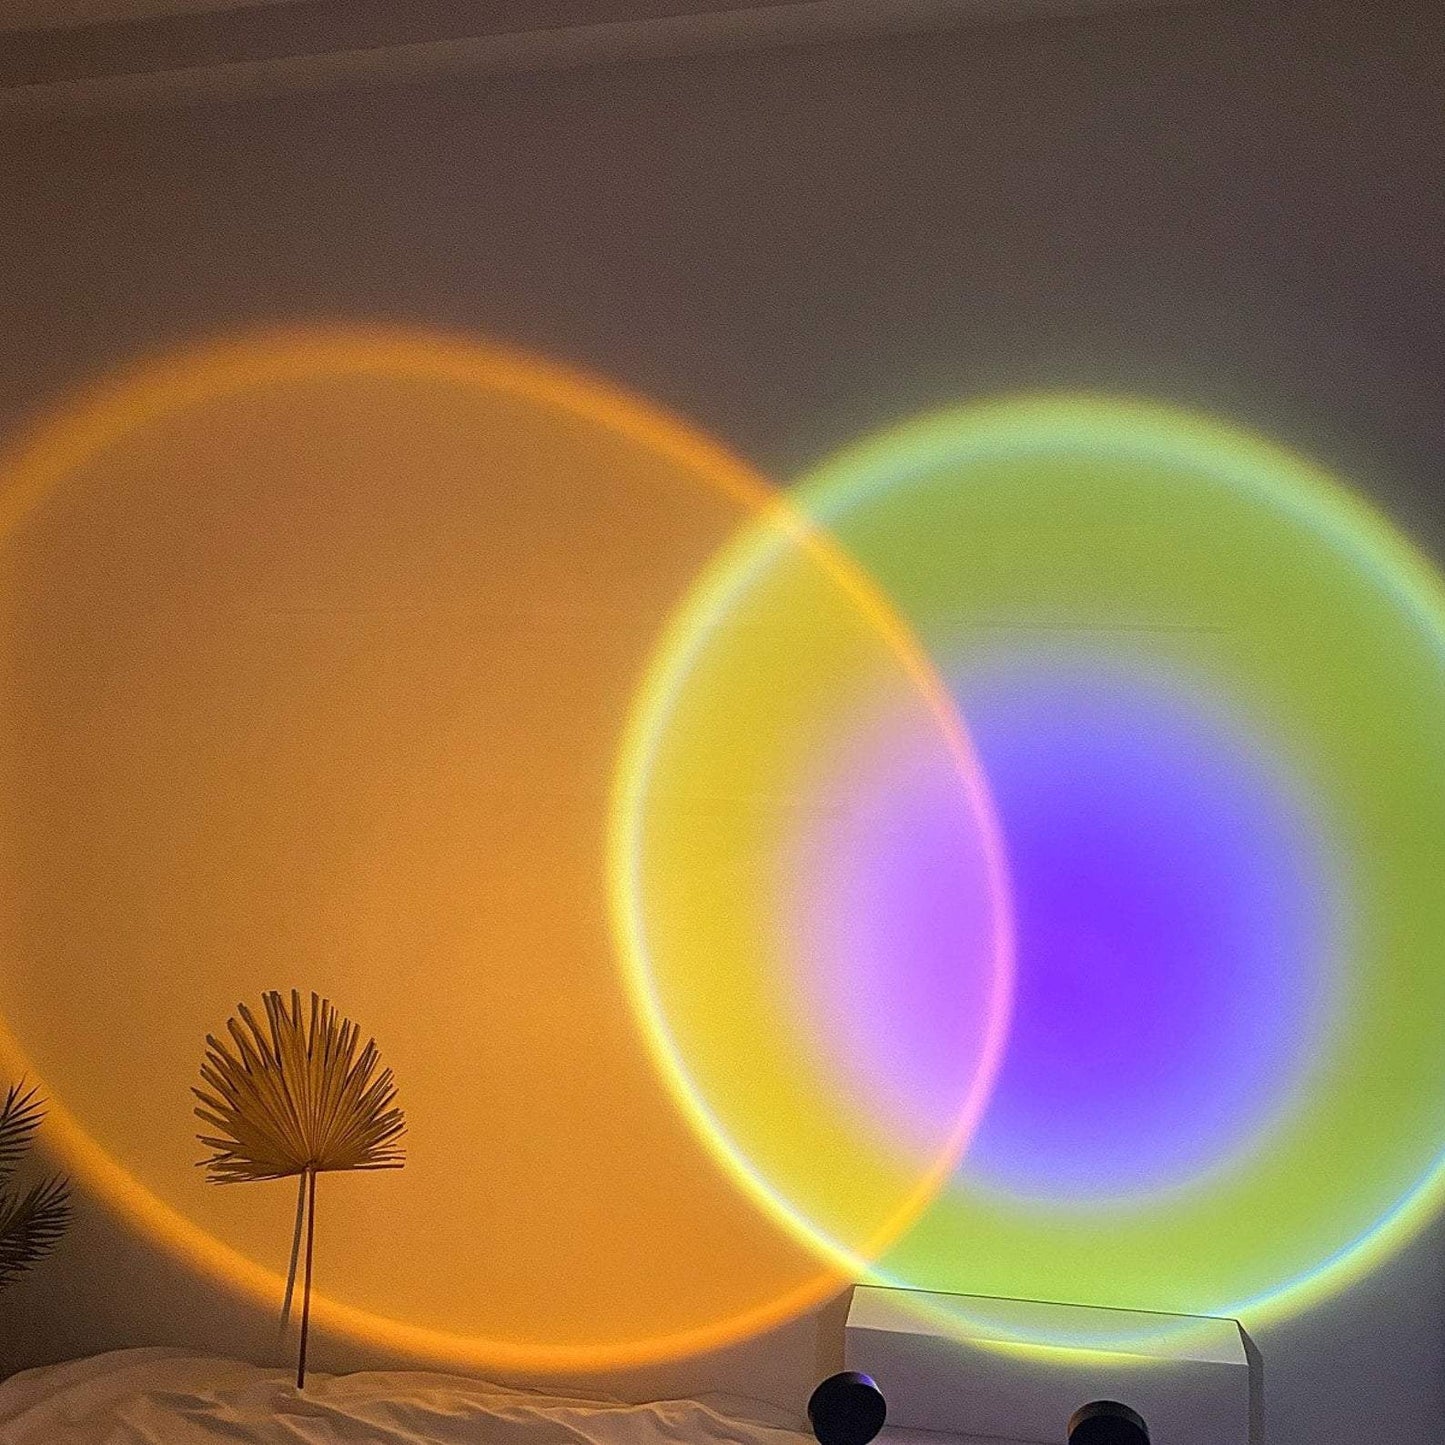 The Sunset Projector Lamp